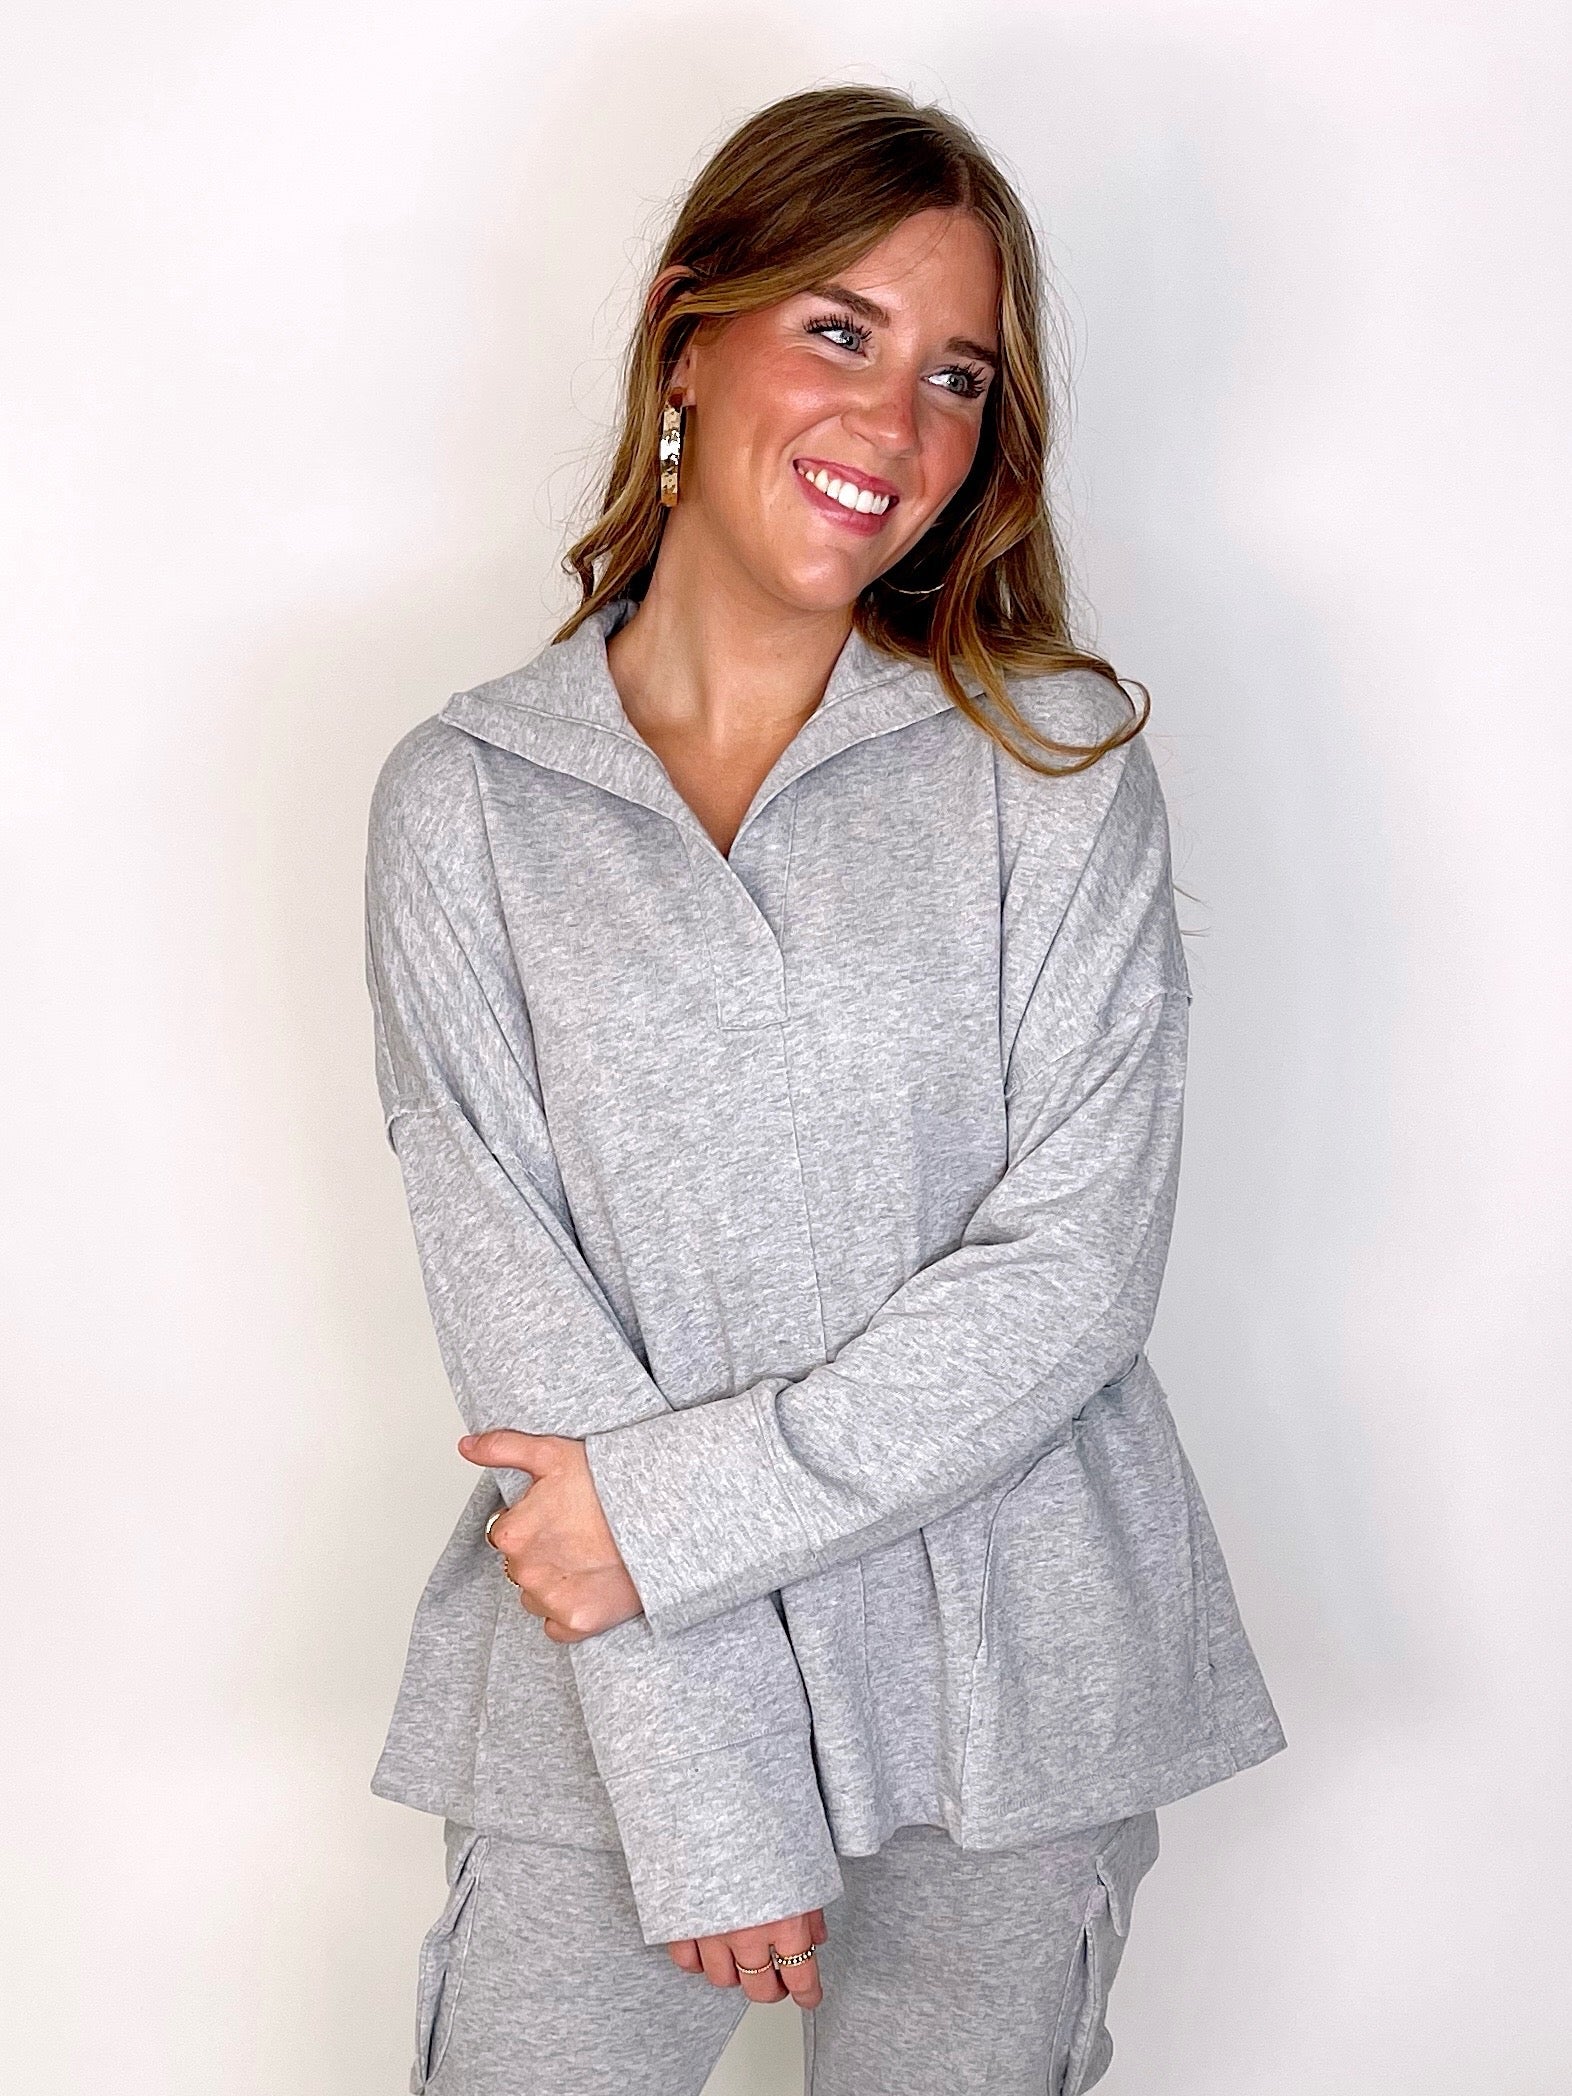 The Landyn Pullover-Pullover-Rae Mode-The Village Shoppe, Women’s Fashion Boutique, Shop Online and In Store - Located in Muscle Shoals, AL.